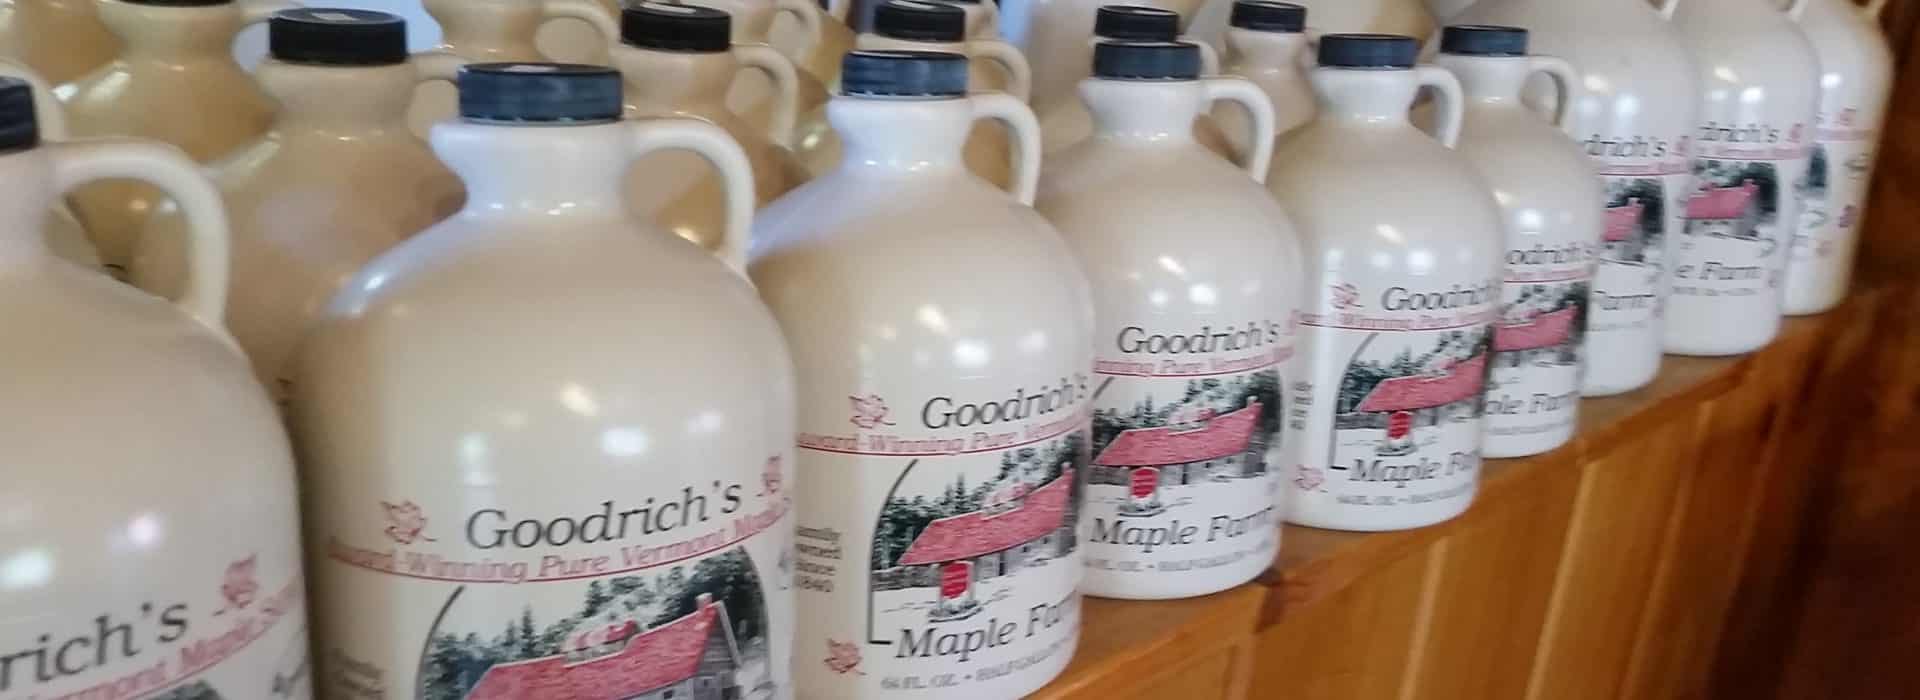 several plastic jugs of maple syrup from Goodrich farm in vermont